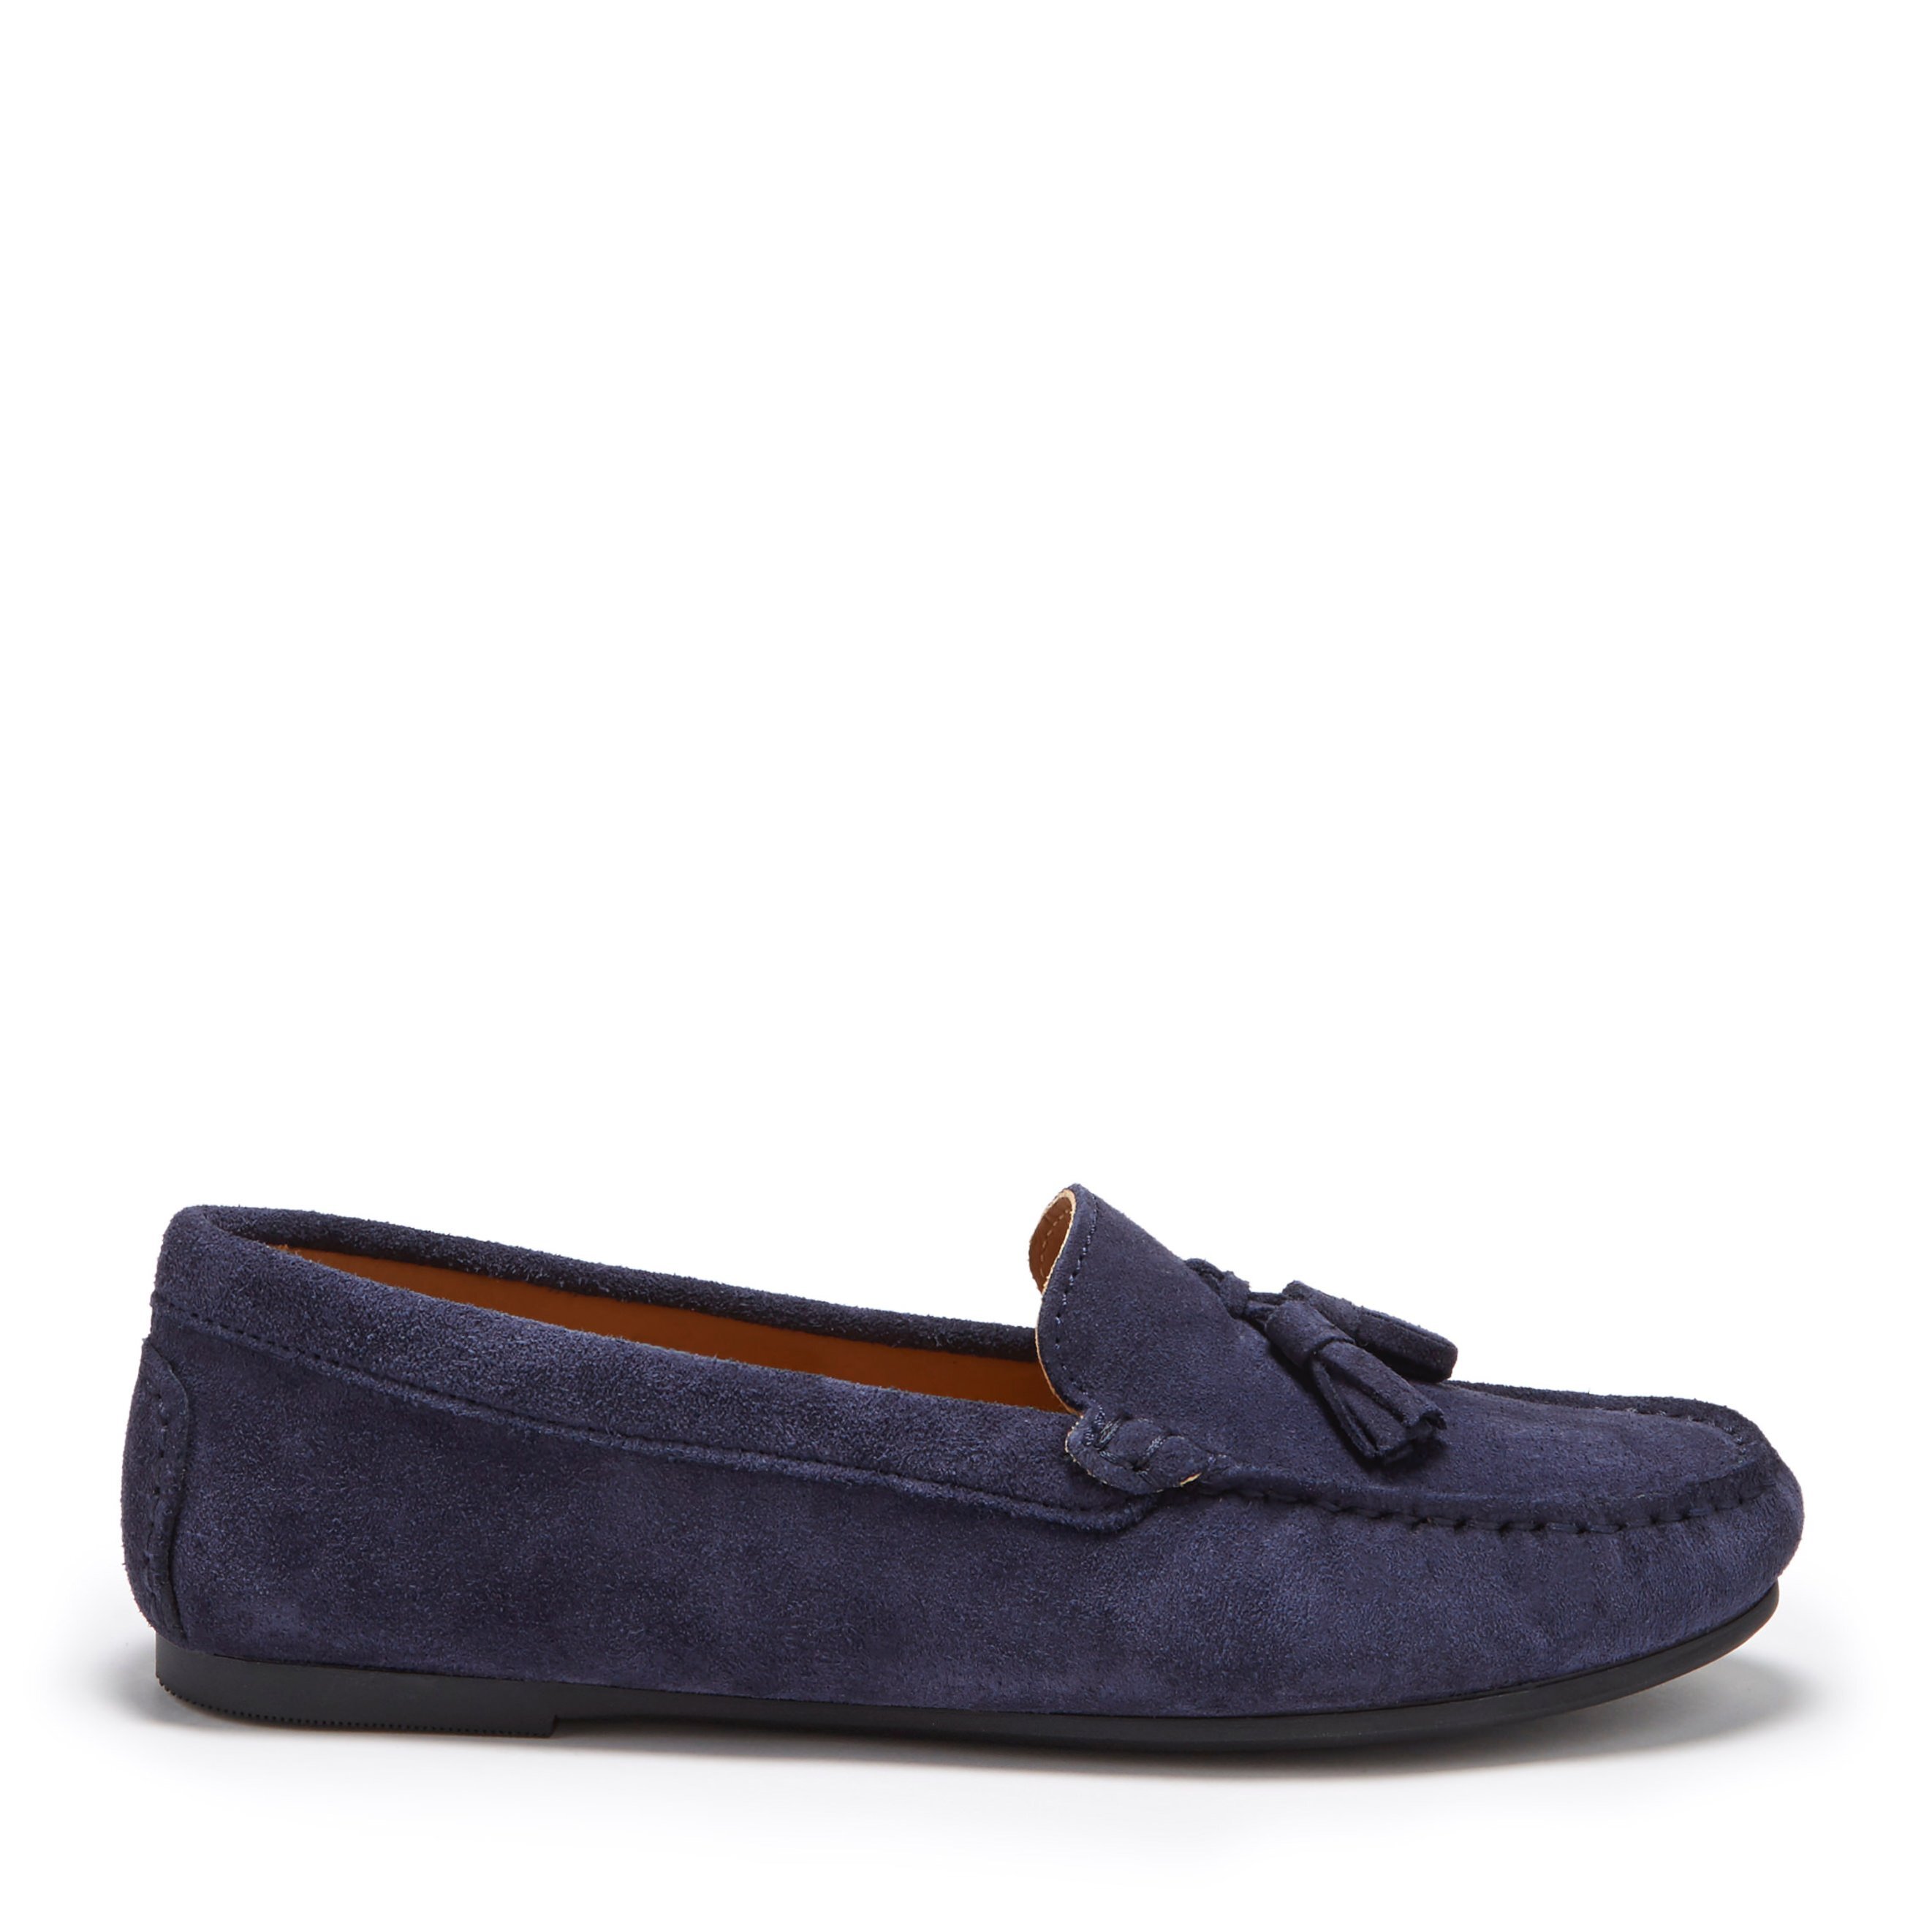 women's suede driving moccasins